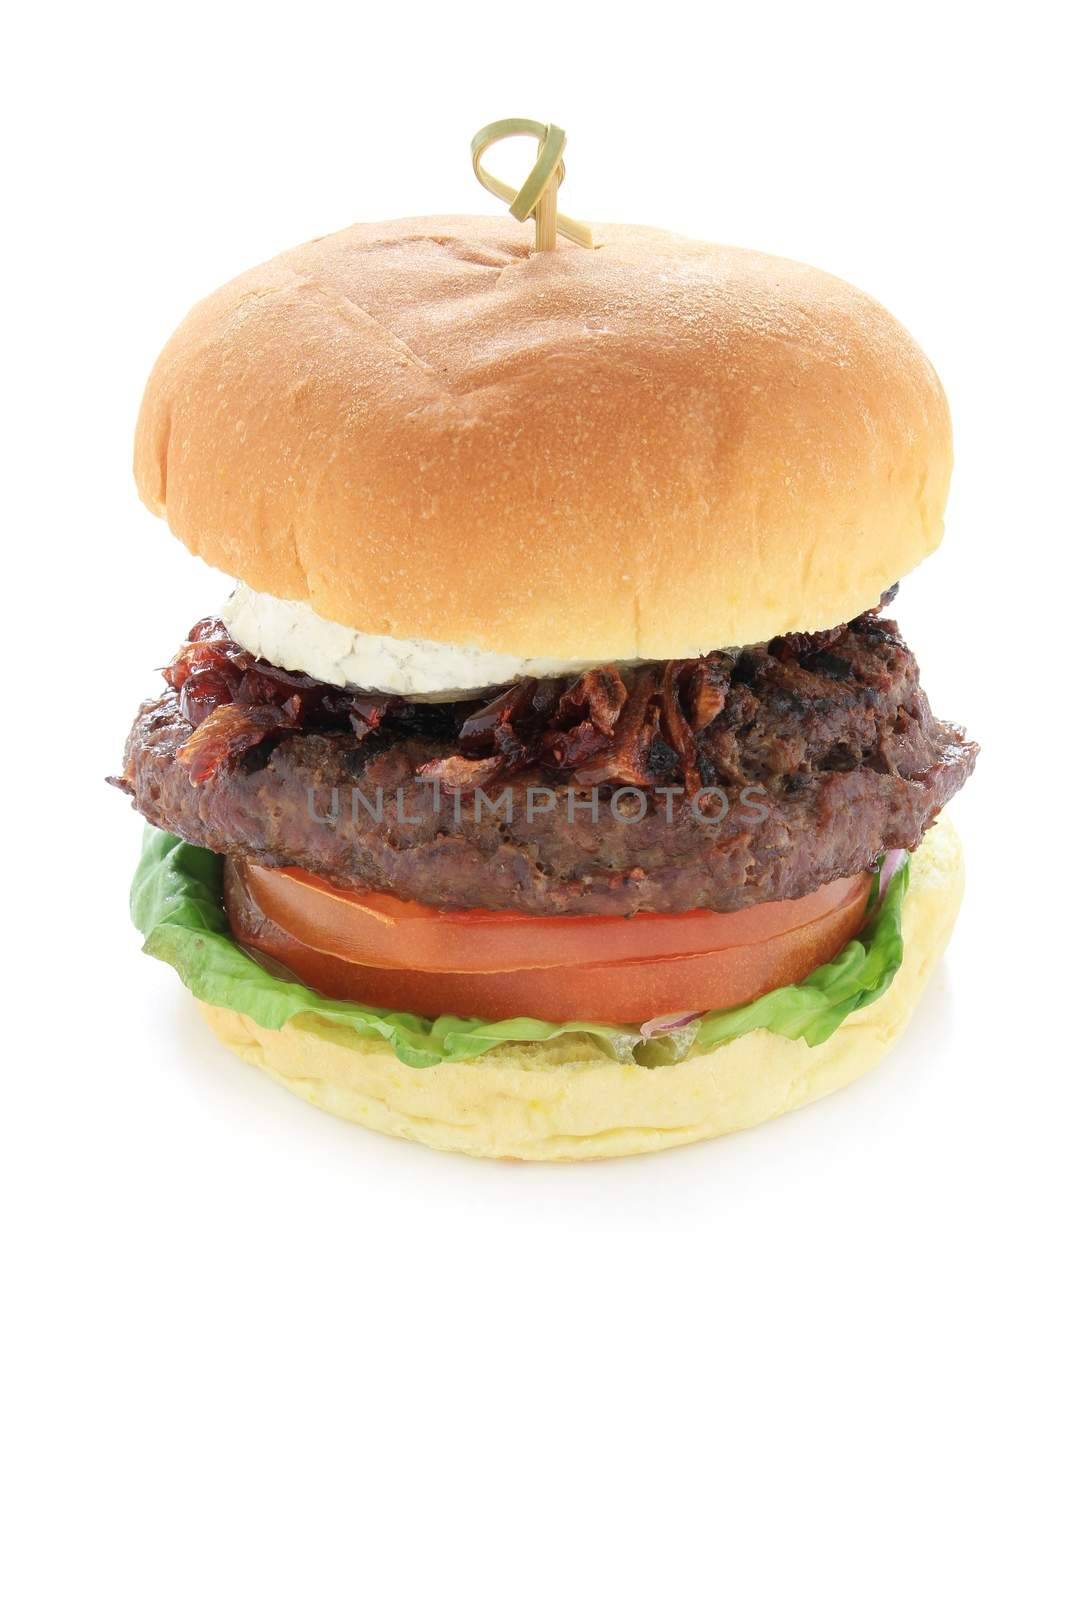 gourmet beefburger with goats cheese isolated